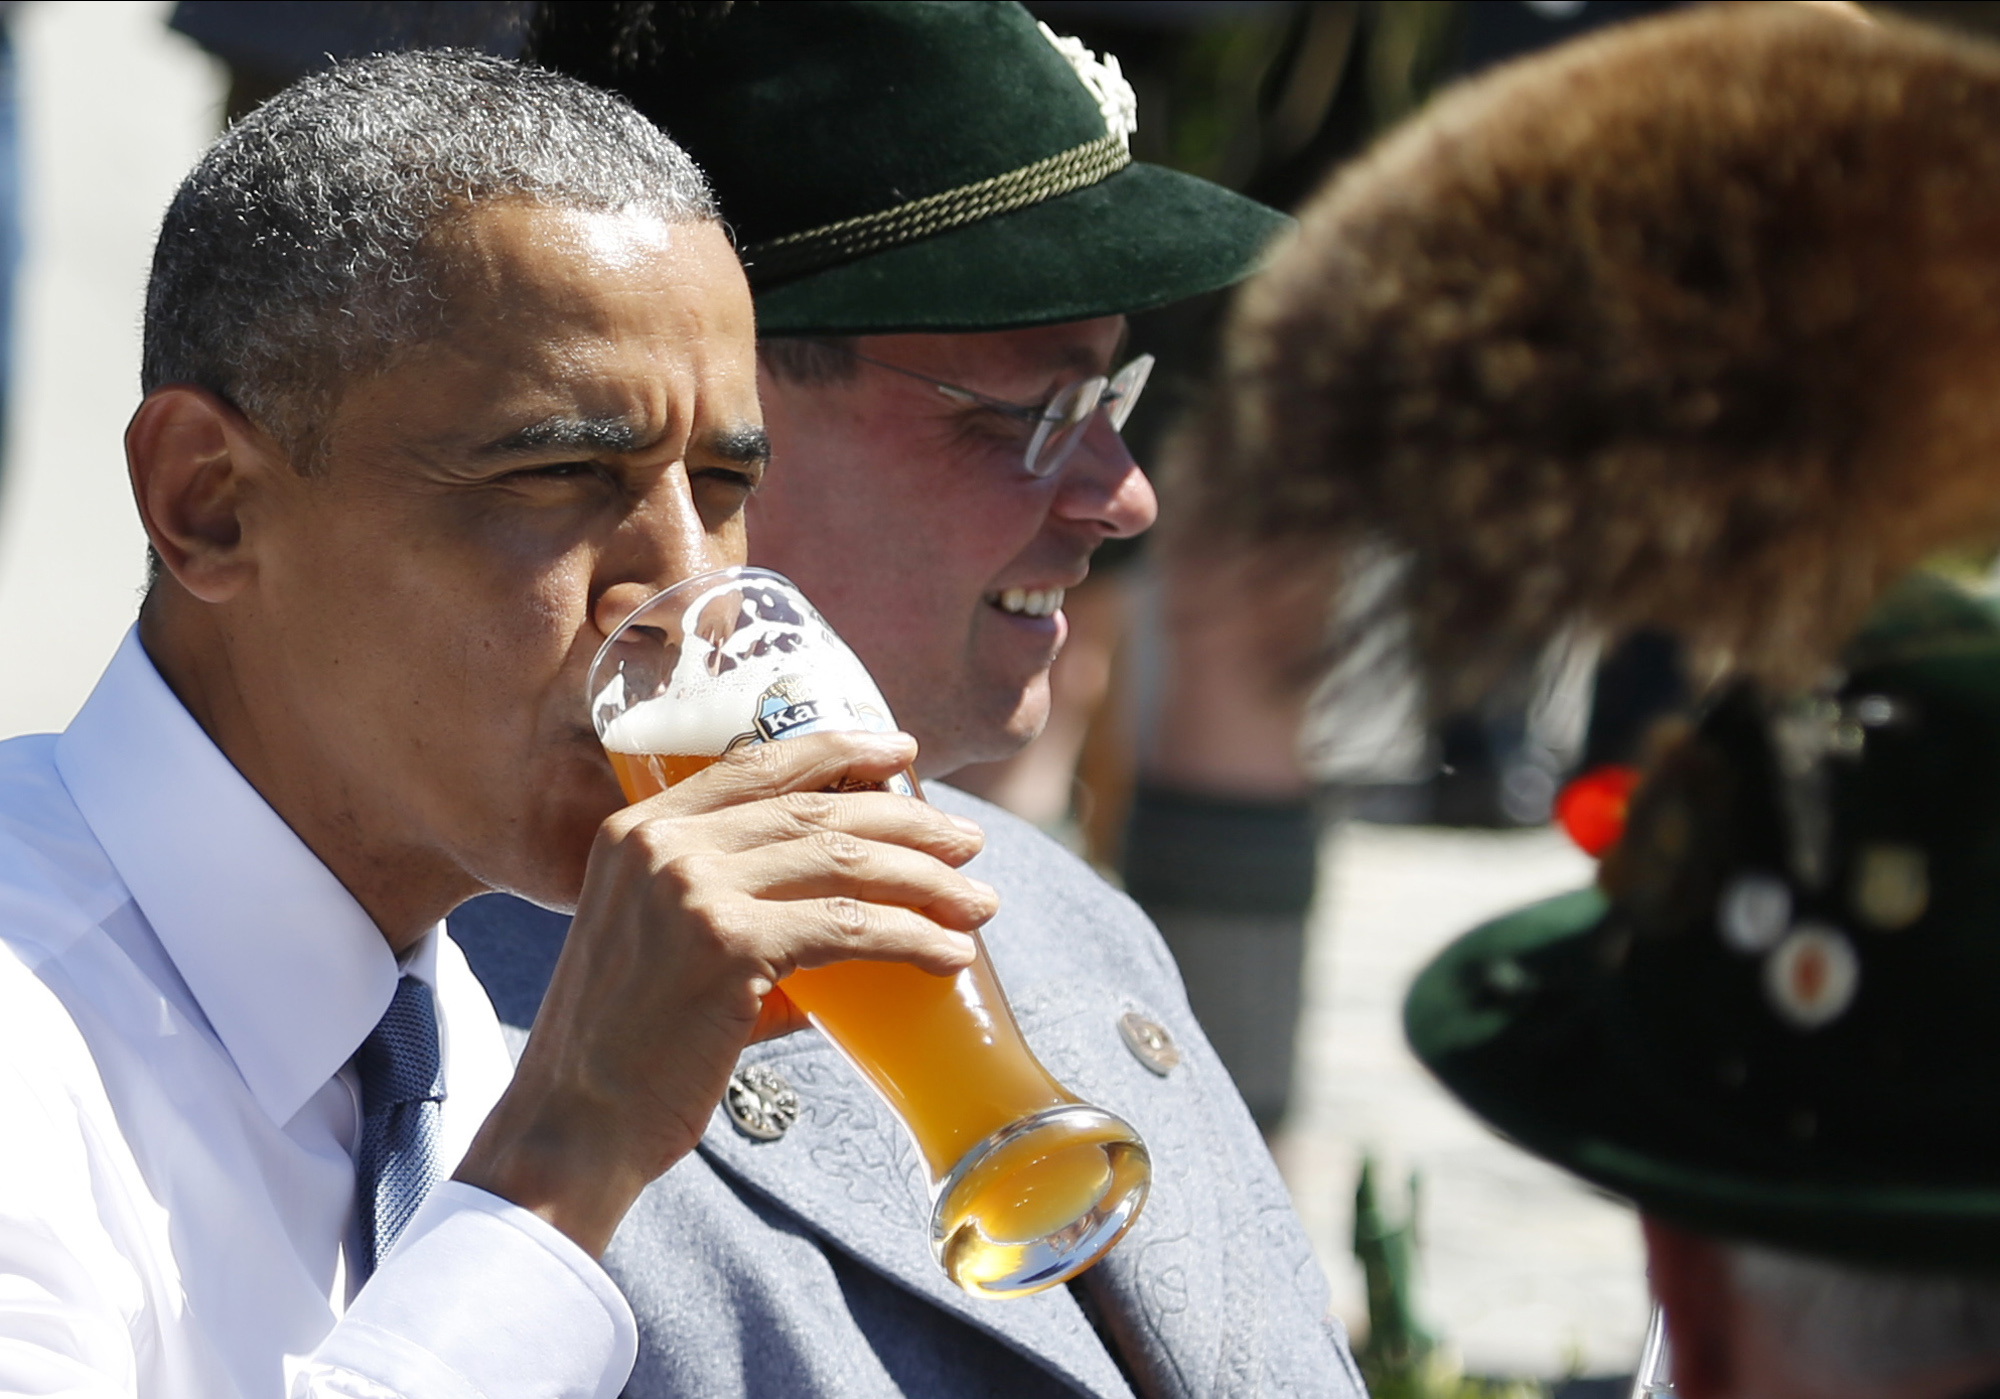 U.S. President Barack Obama drinks a beer as he sits between men dressed in traditional Bavarian clothes during a visit to the village of Kruen, southern Germany, Sunday, June 7, 2015 prior to the G-7 summit.